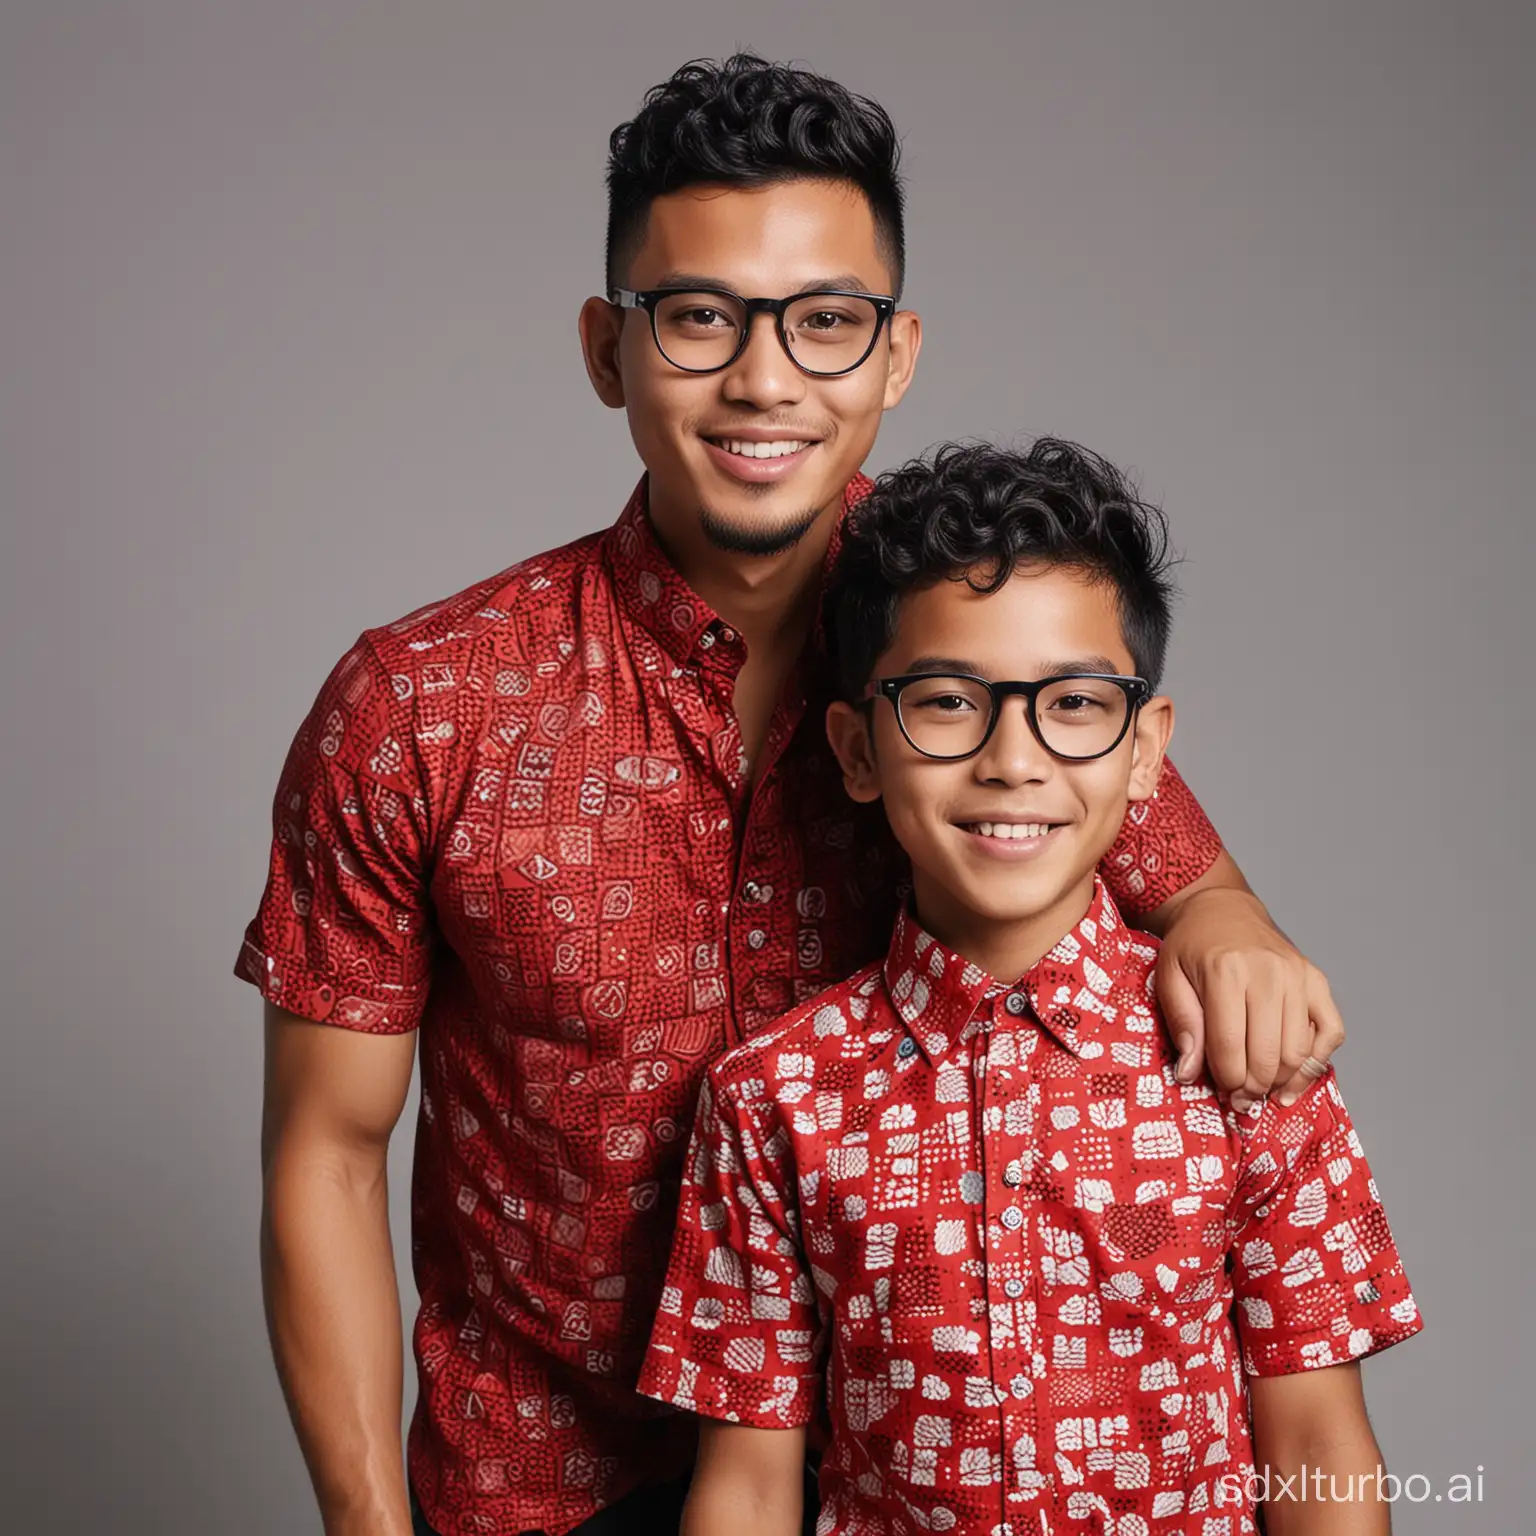 Indonesian-Family-Portrait-in-Red-and-Black-Batik-Shirts